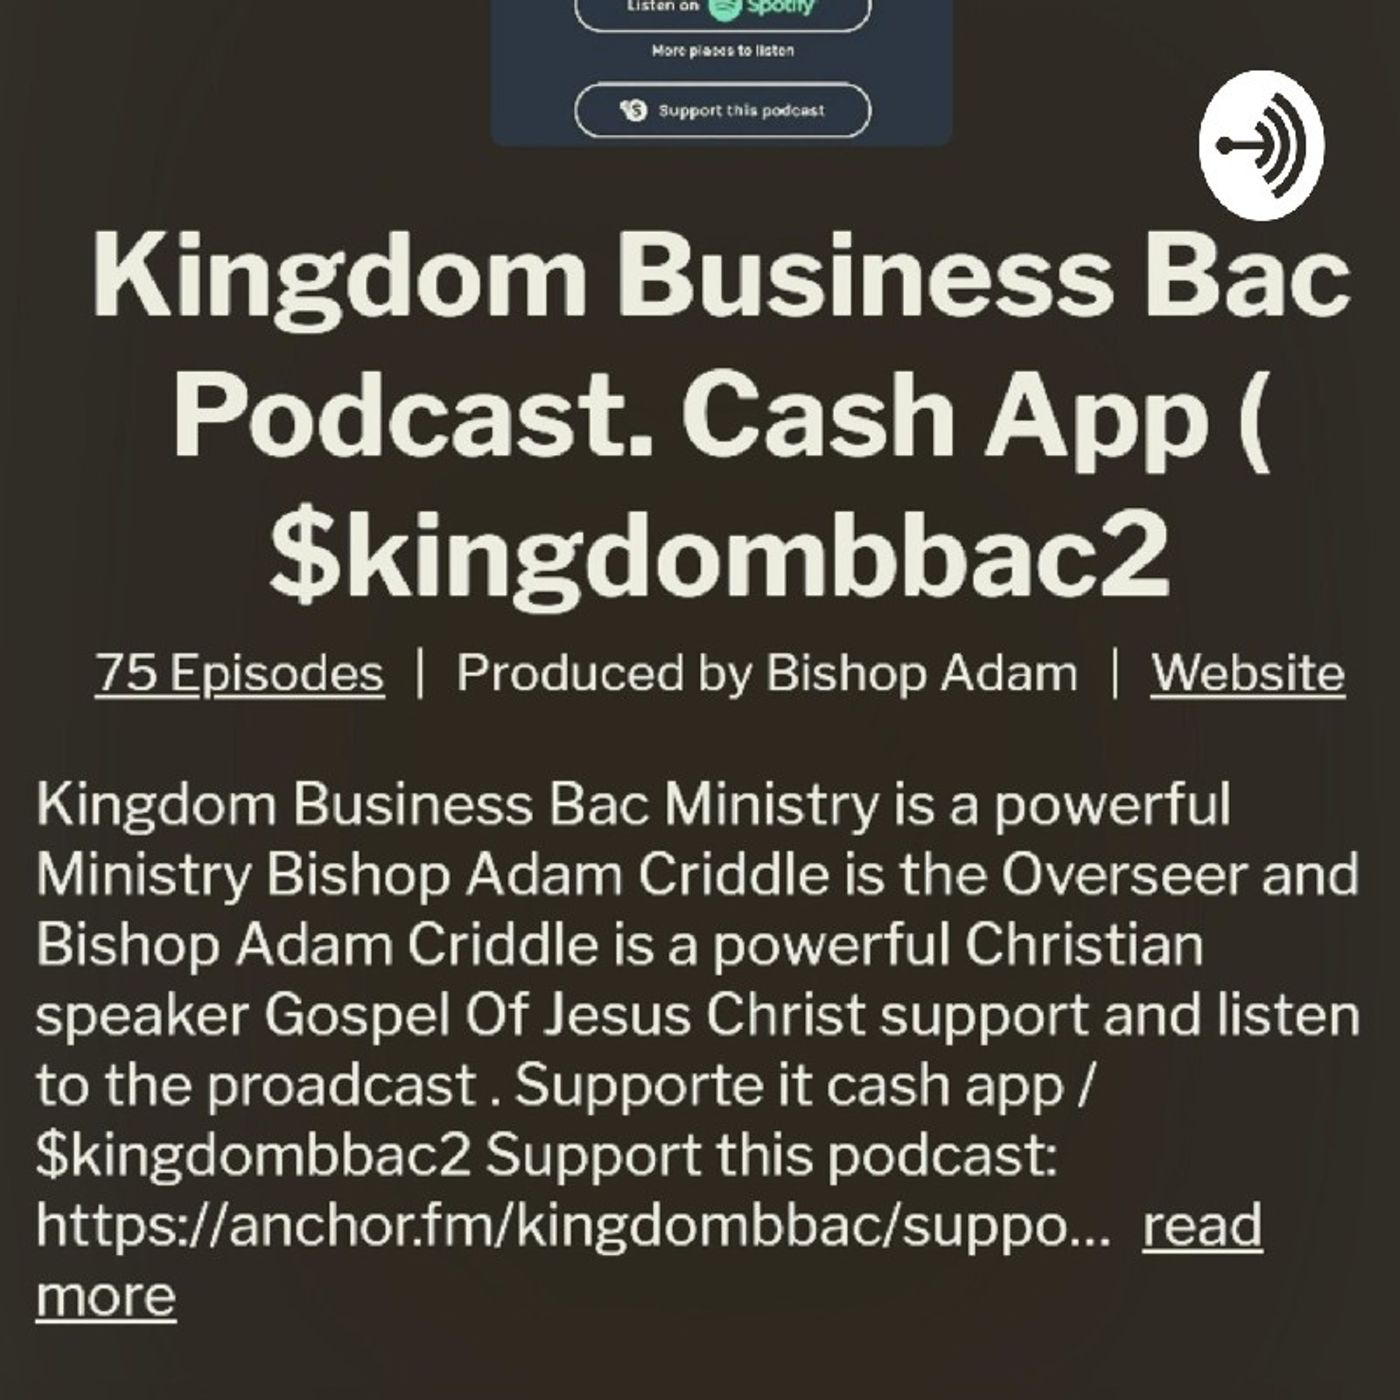 Episode 102 - KIMGDOM BUSINESS Bac Ministry's show